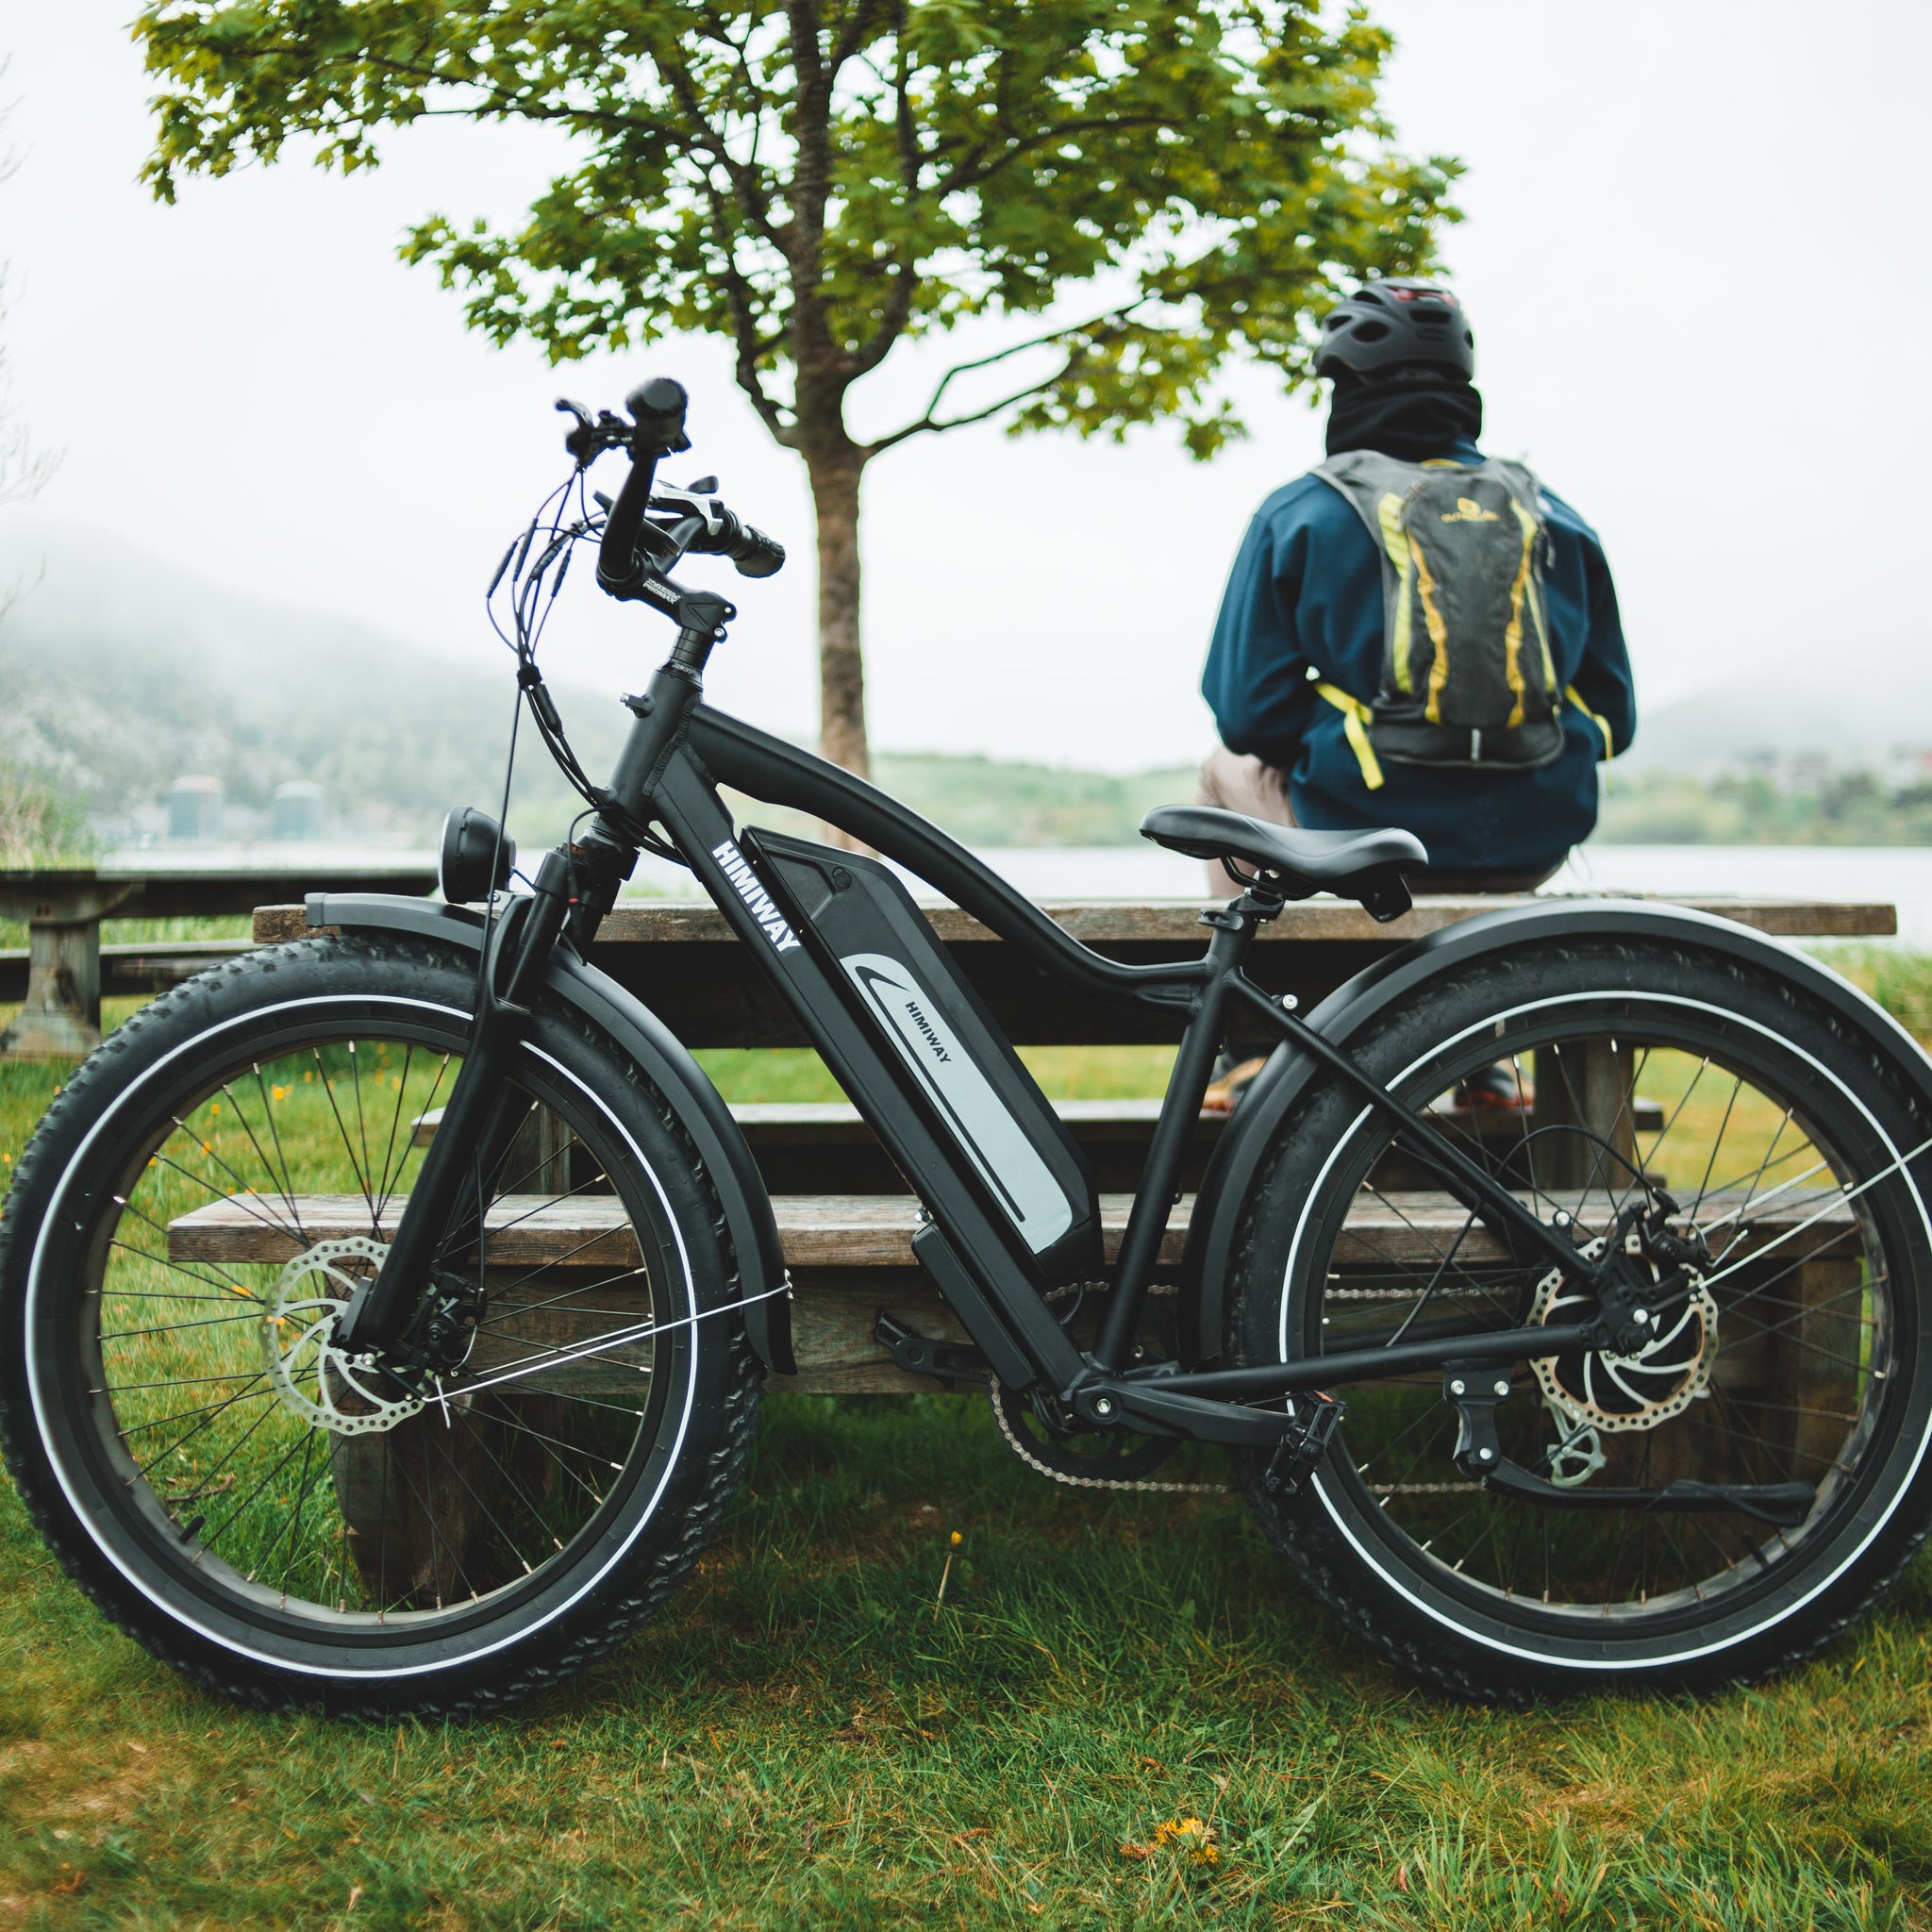 How to Choose an Electric Model Bike for Fishing